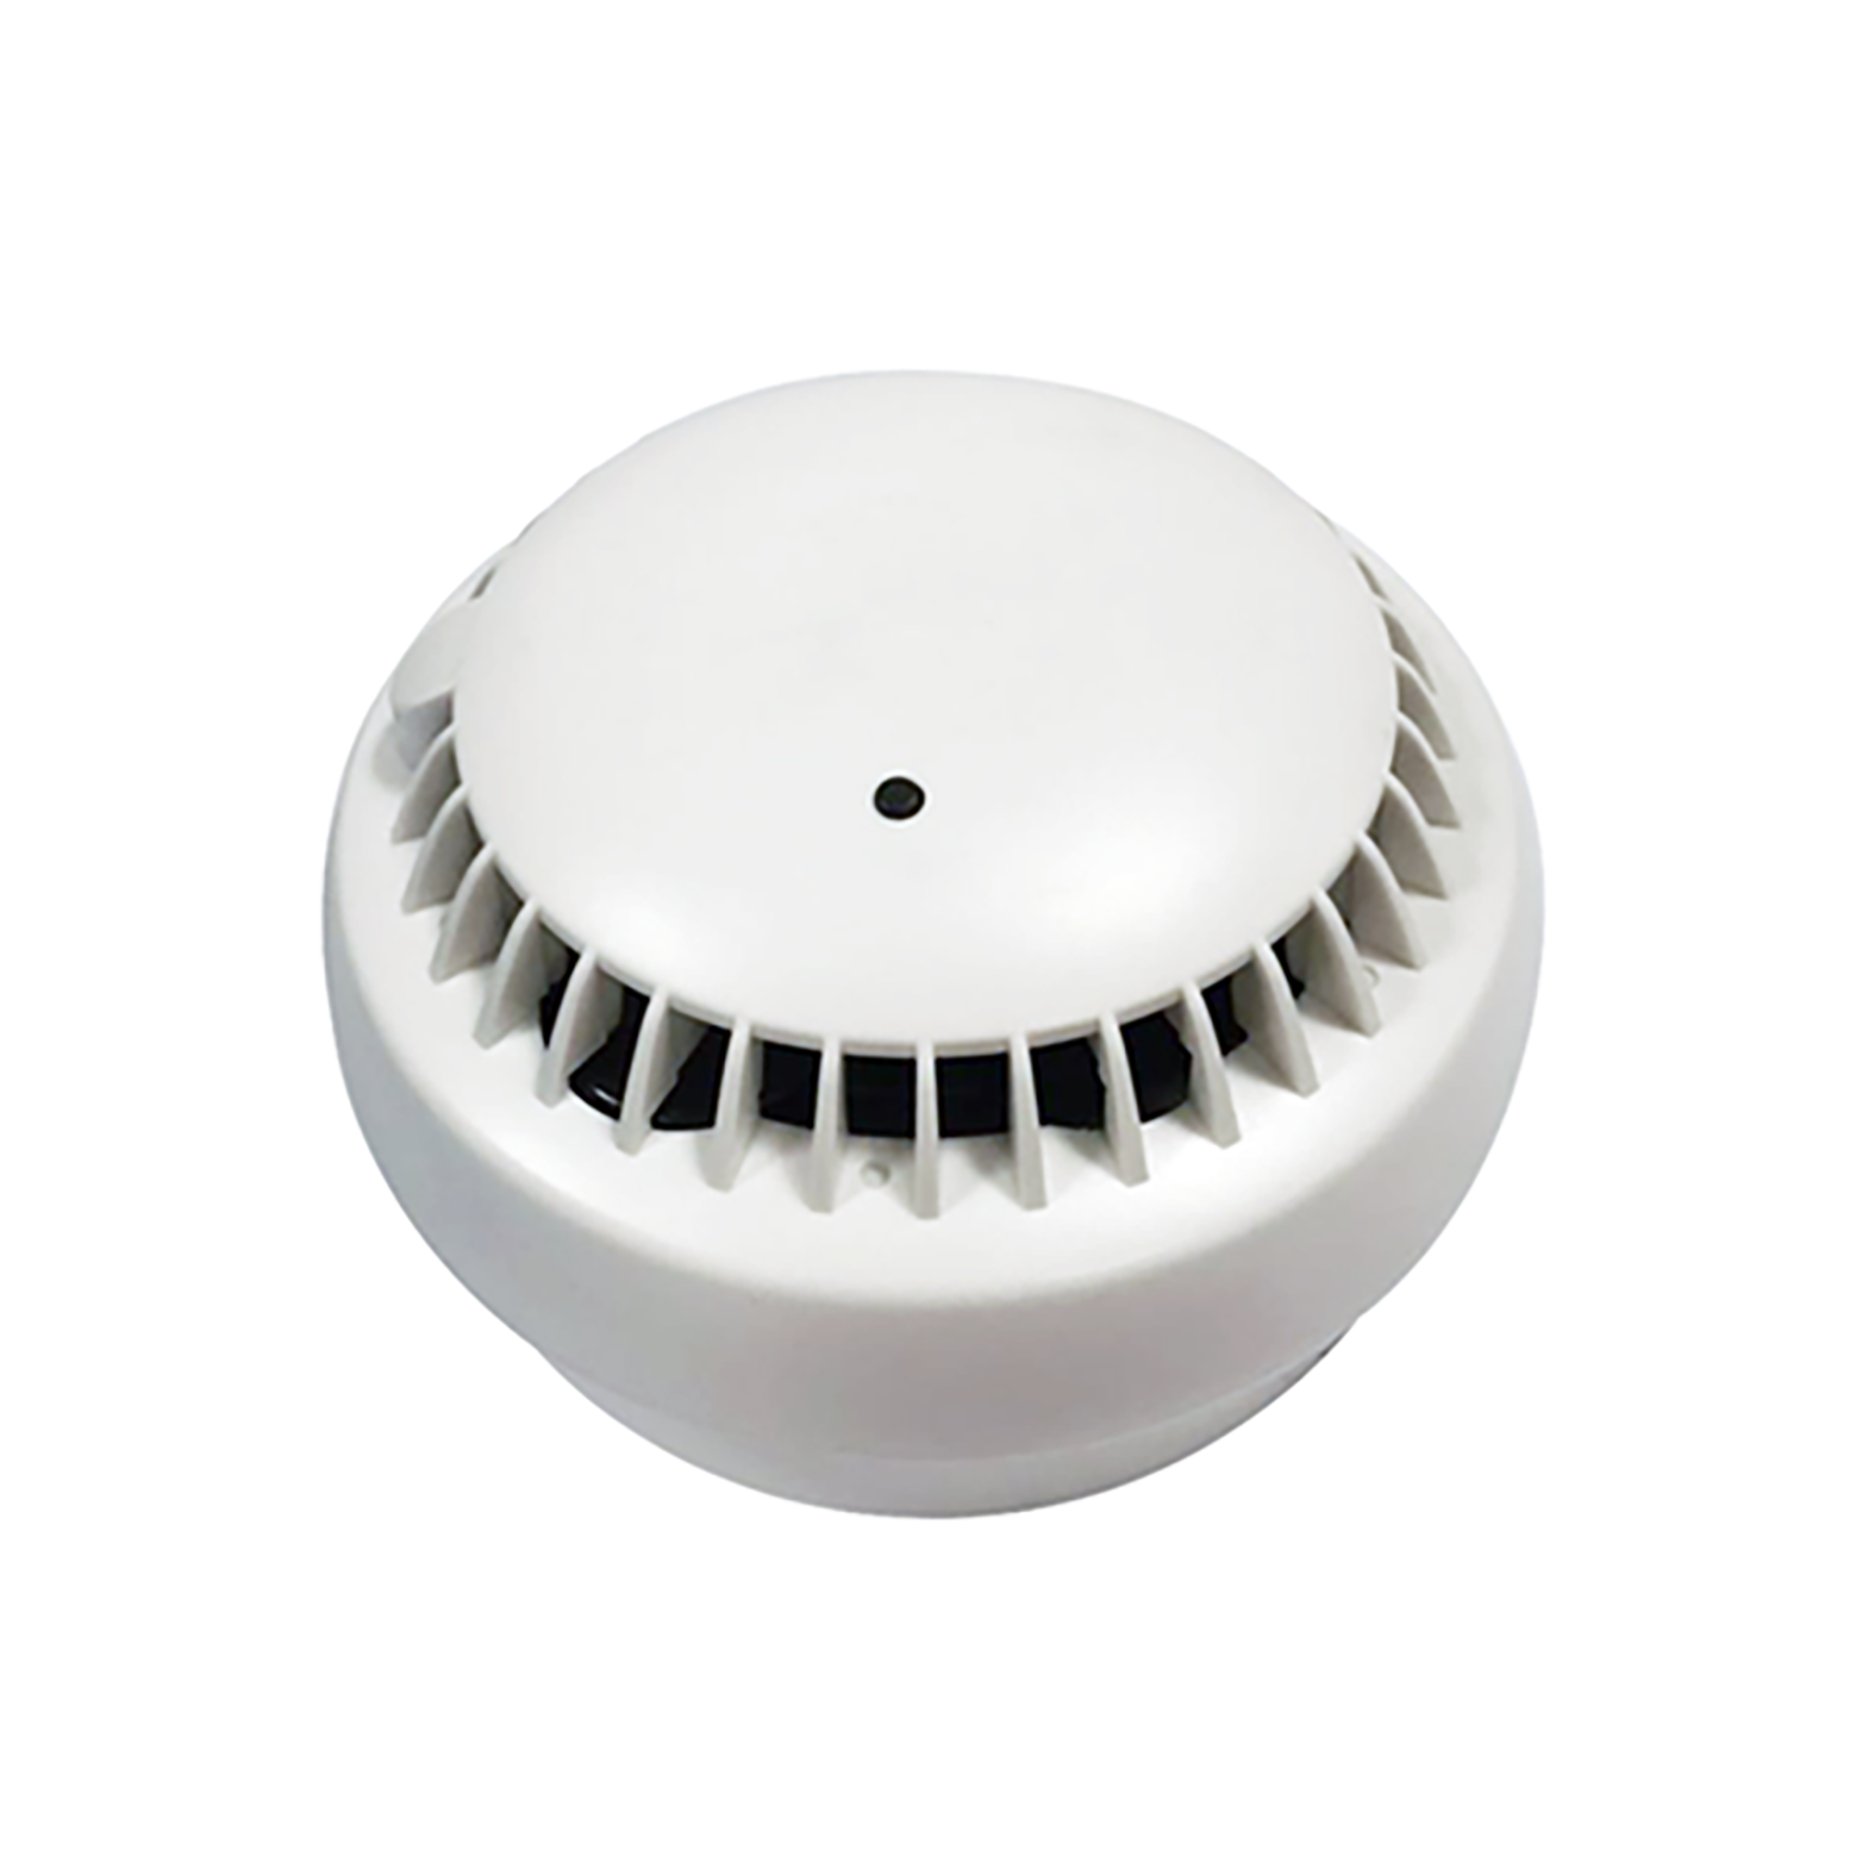 Standalone Smoke Detector (R): Exceptional Safety and Reliability for Fire Detection